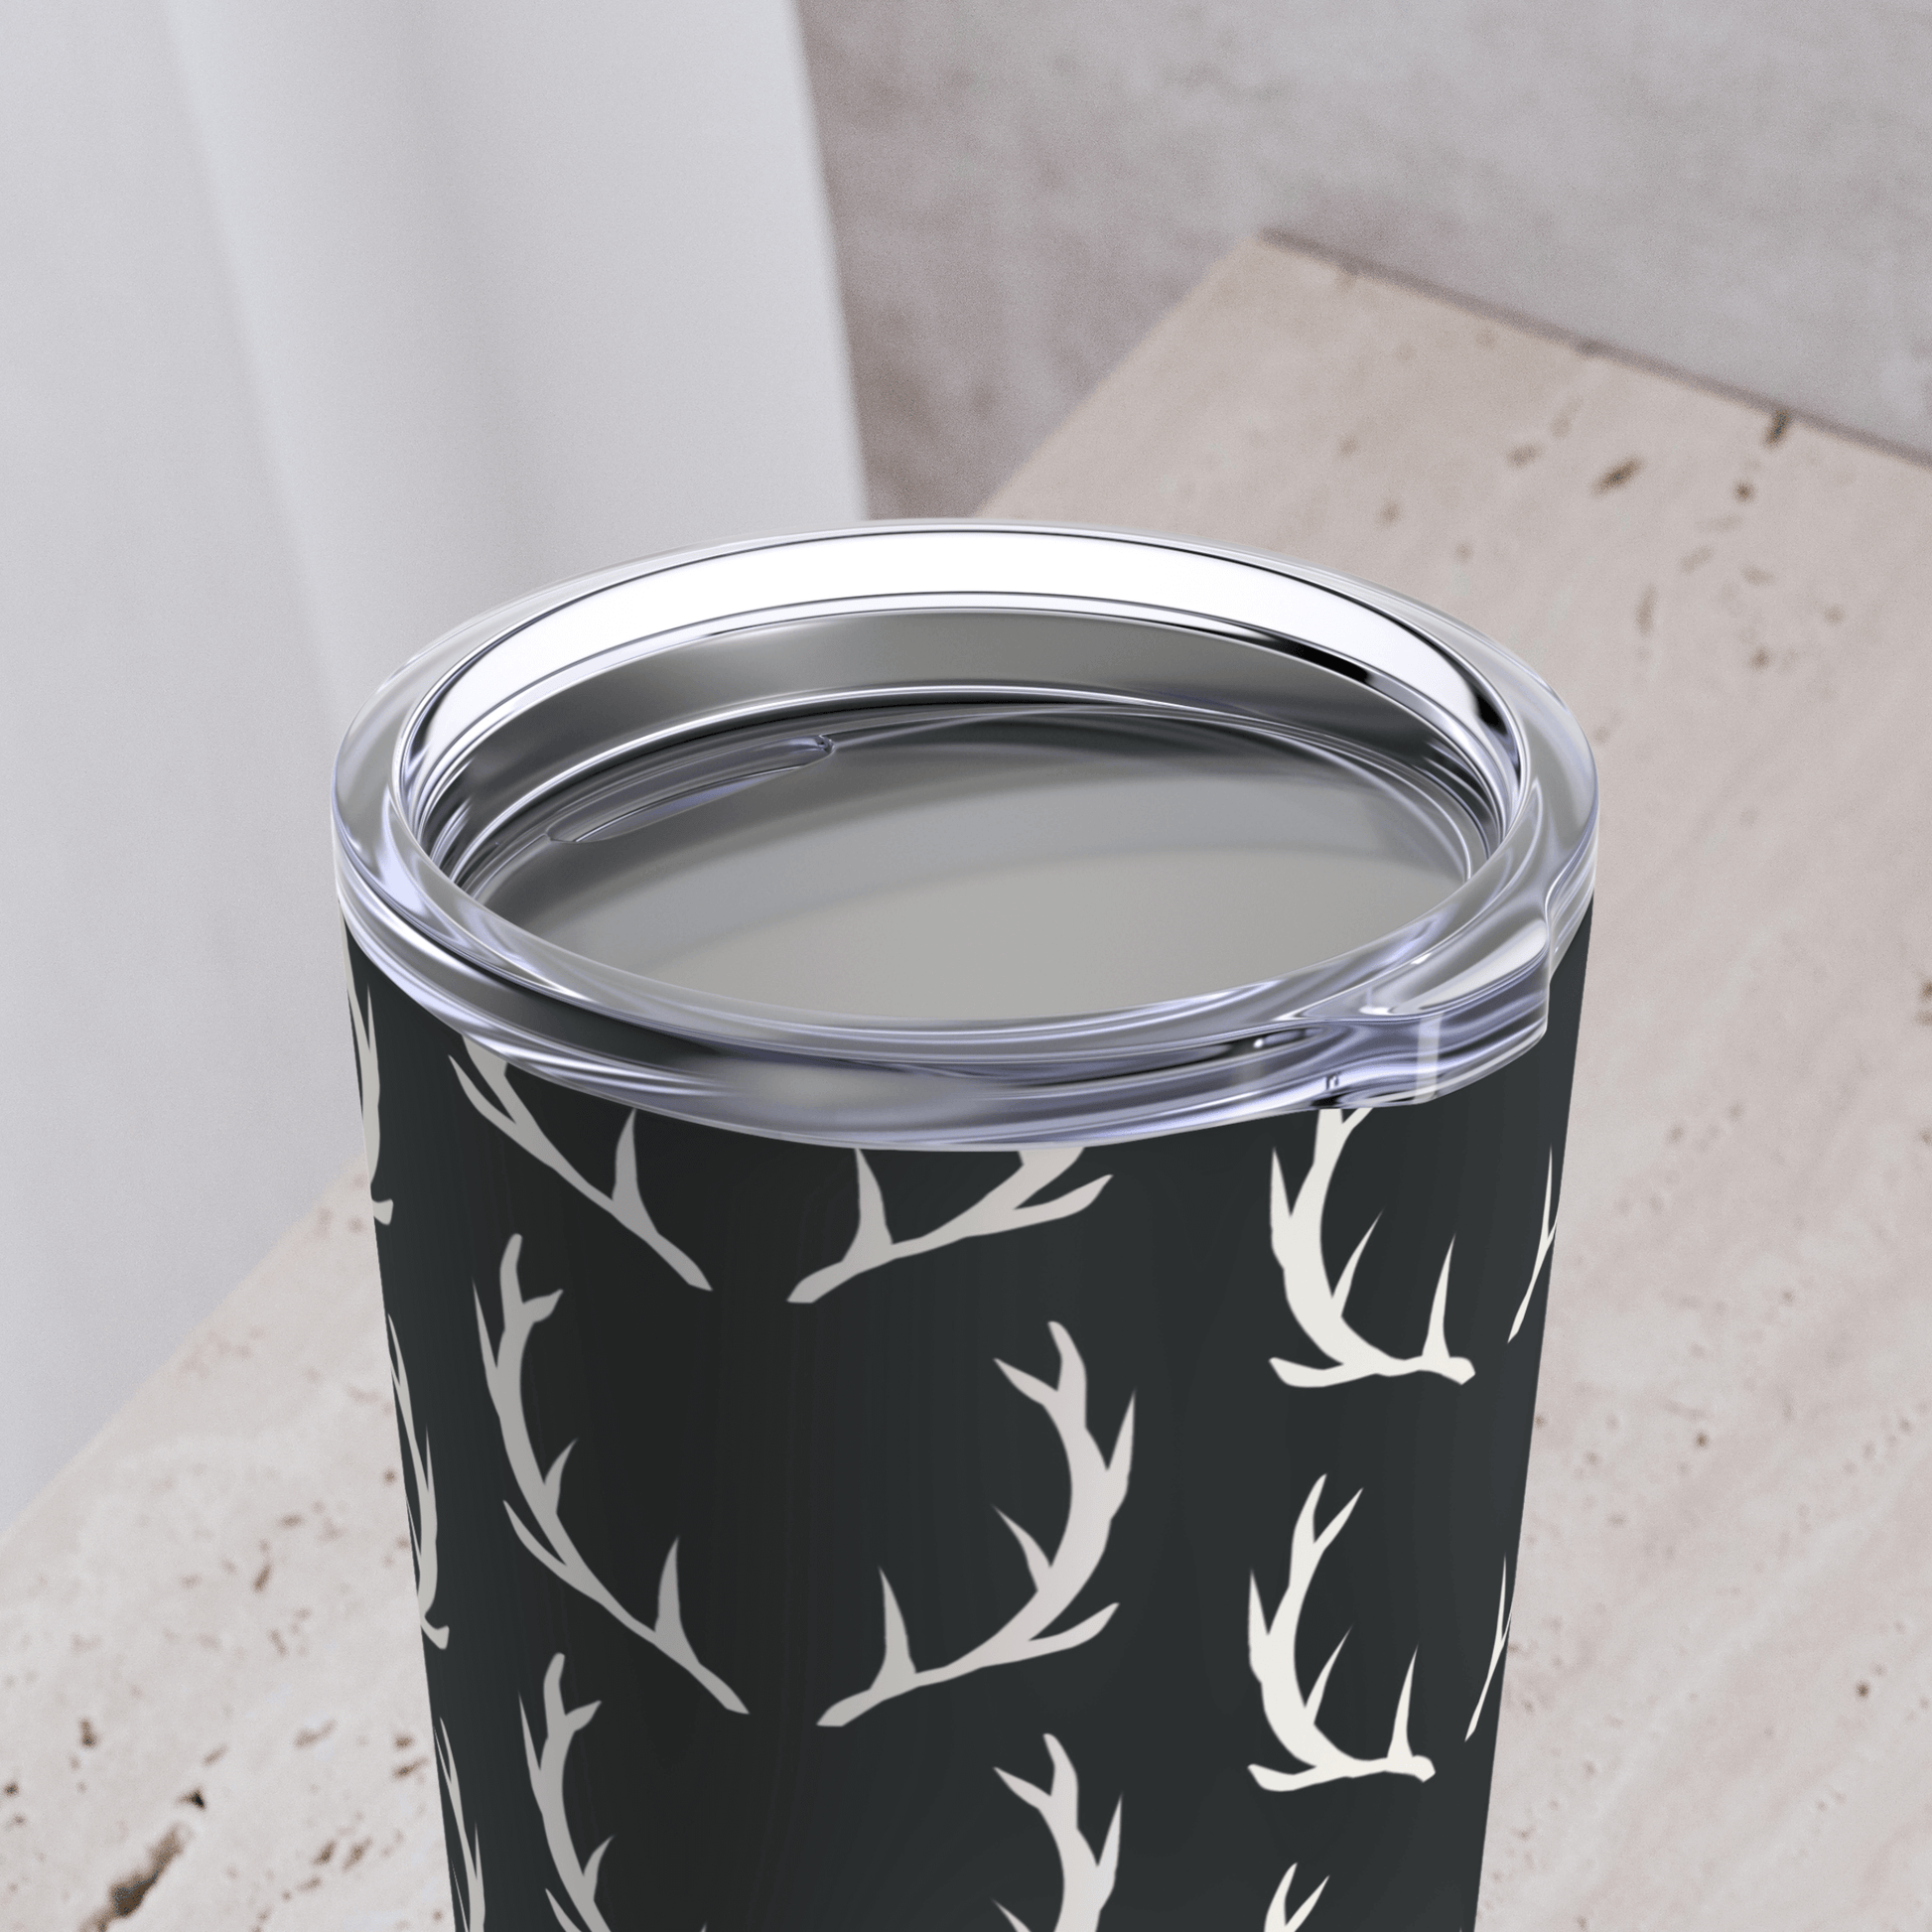 up close view shows the lid on our deer hunting tumbler for men. The lid is clear plastic.